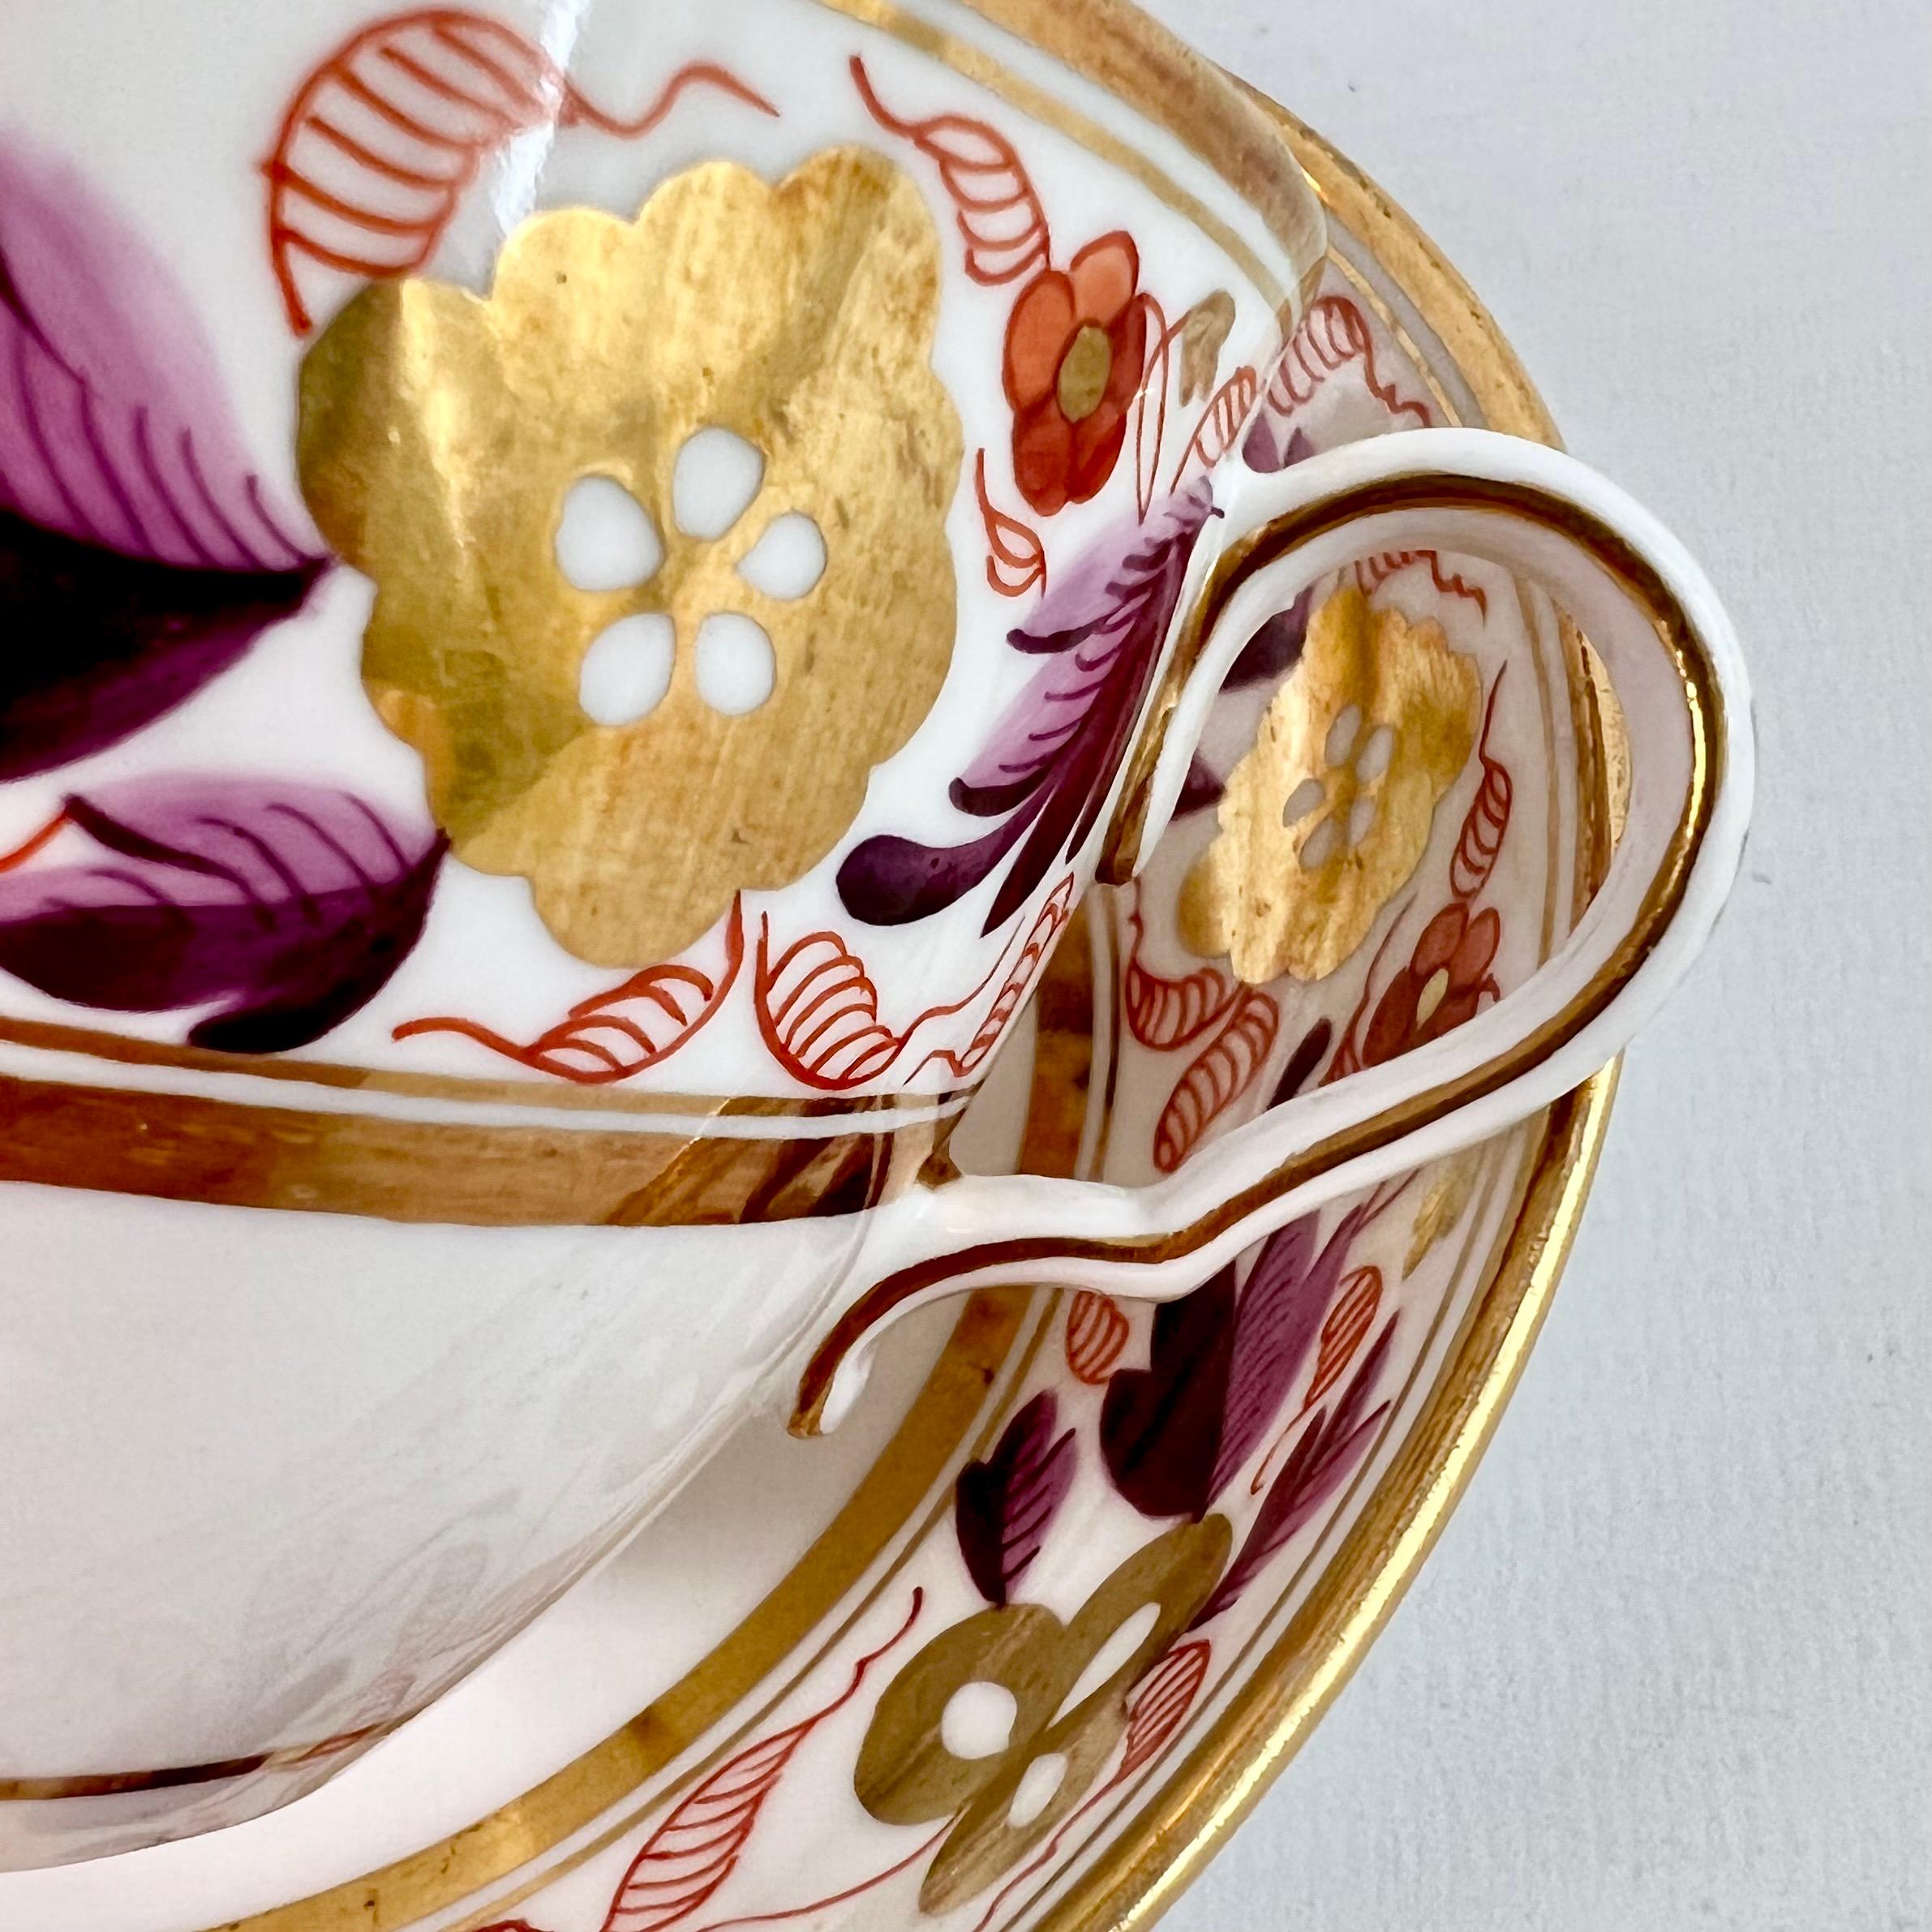 Spode Porcelain Teacup Trio, Puce and Gilt Floral Pattern, Neoclassical ca 1810 6